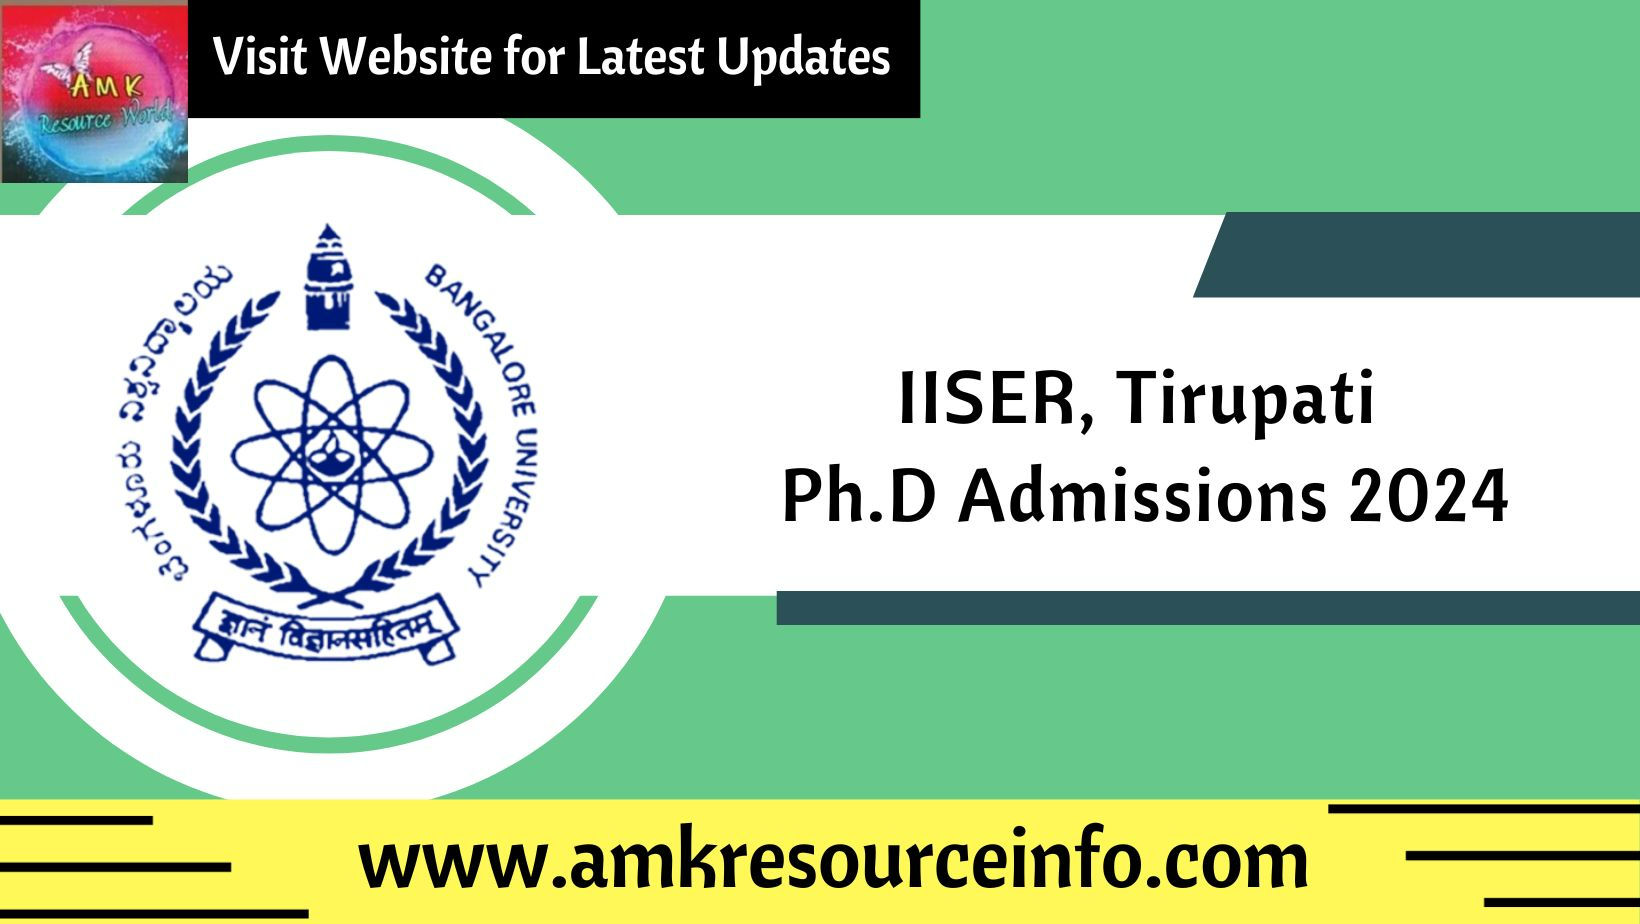 IISER, Tirupati invite applications for admission to Ph.D Programme